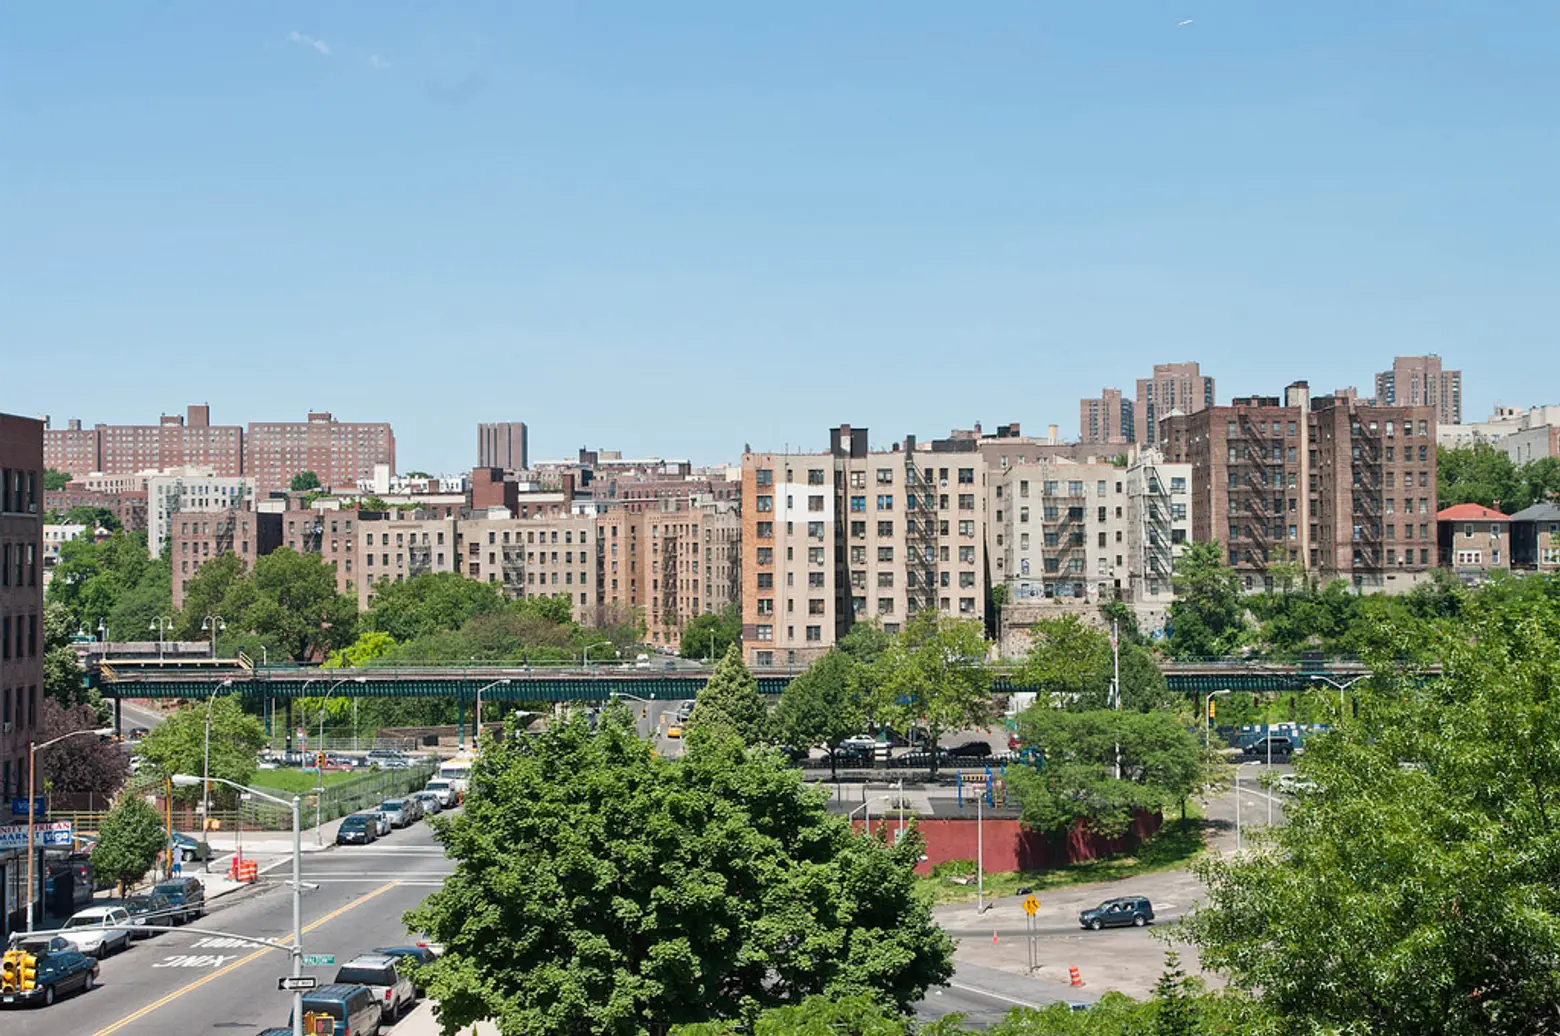 POLL: Will the South Bronx become the next ‘it’ neighborhood?